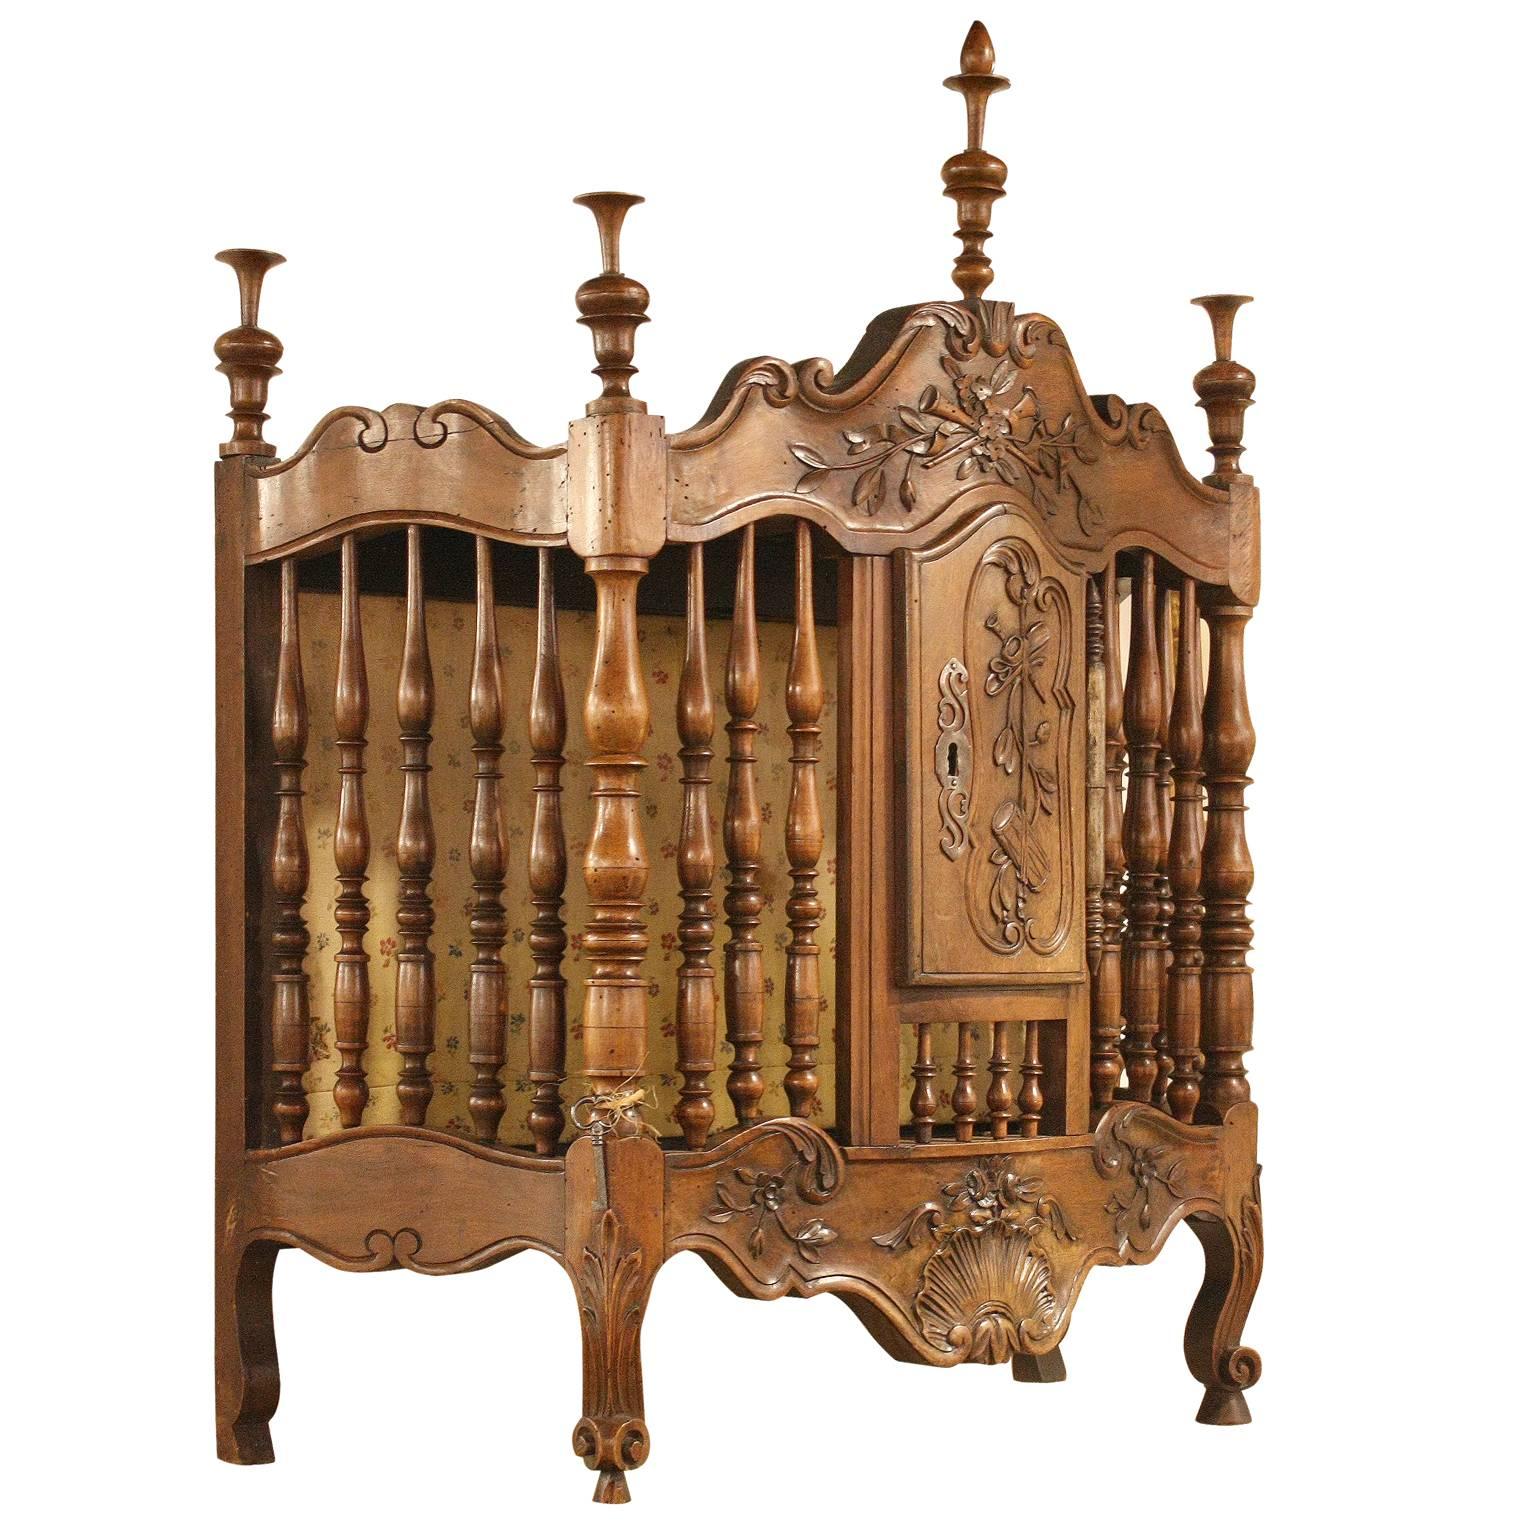 Mid-19th century French walnut Panetiere with key, circa 1840.